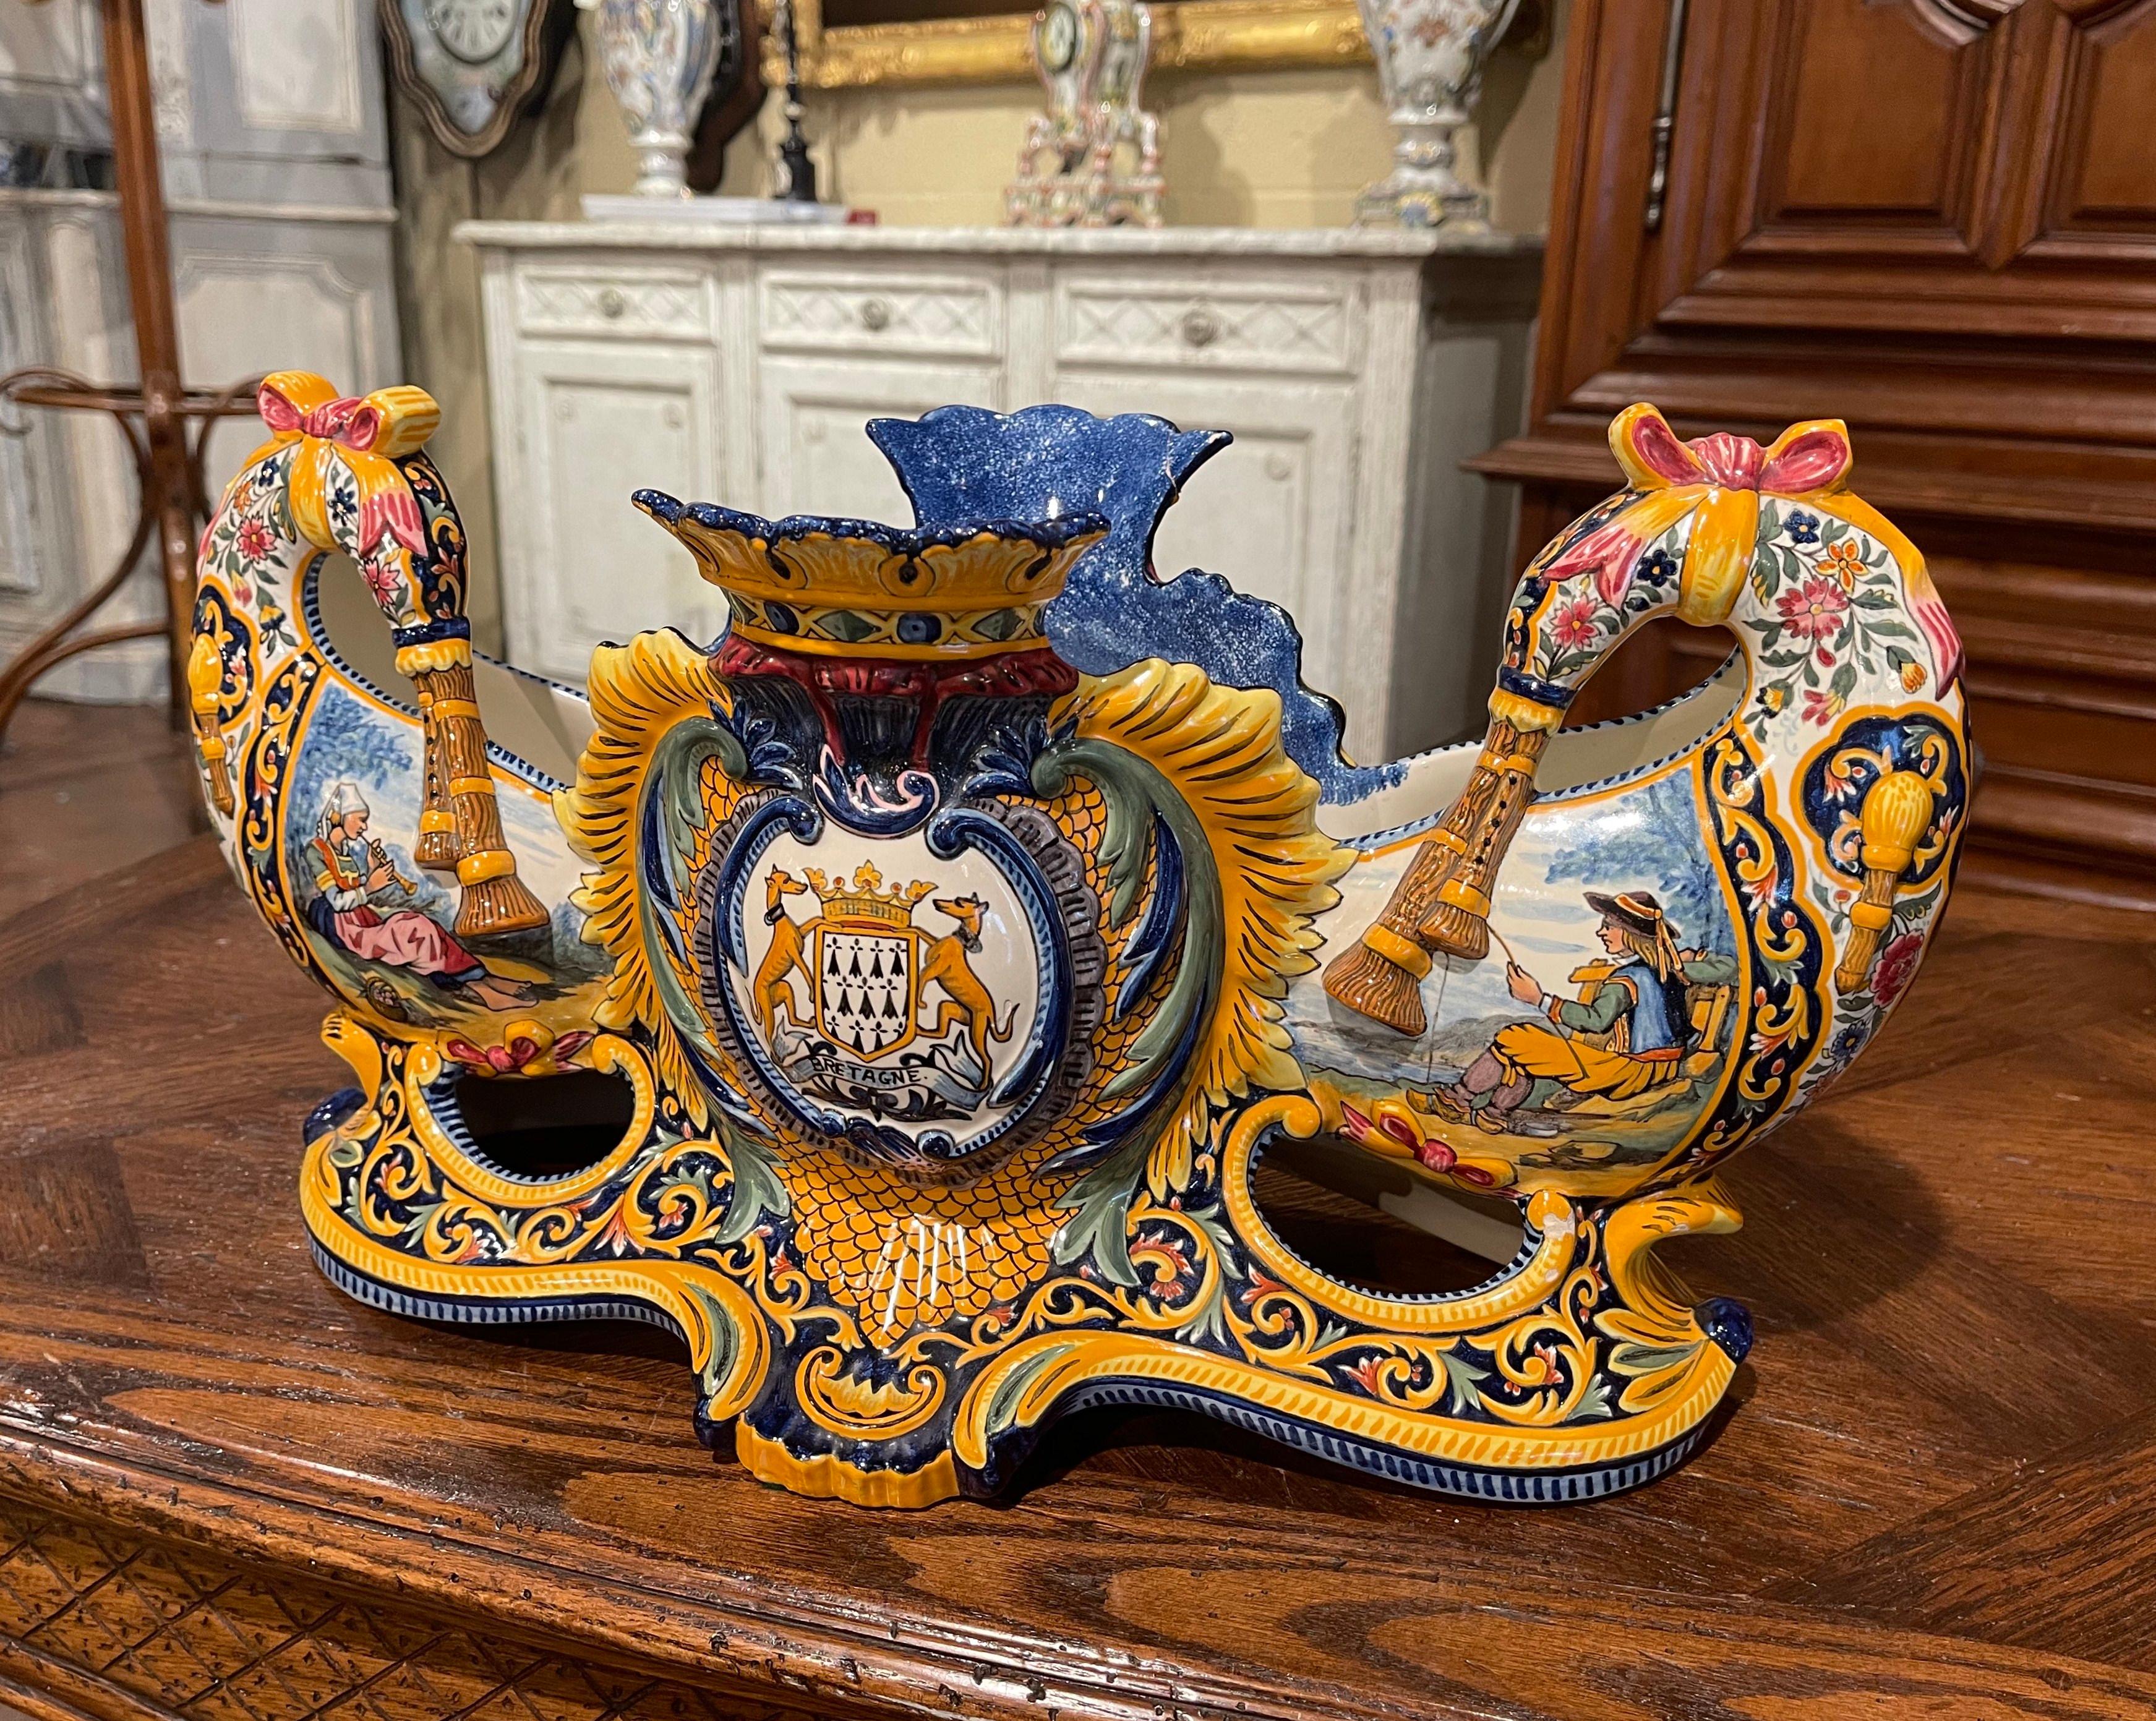 This elegant and colorful antique cachepot was sculpted in Brittany, France, circa 1960. The uniquely oblong shaped planter with double- bagpipe handles, and is decorated with hand painted center medallions set inside a crown and leaf motif frame in